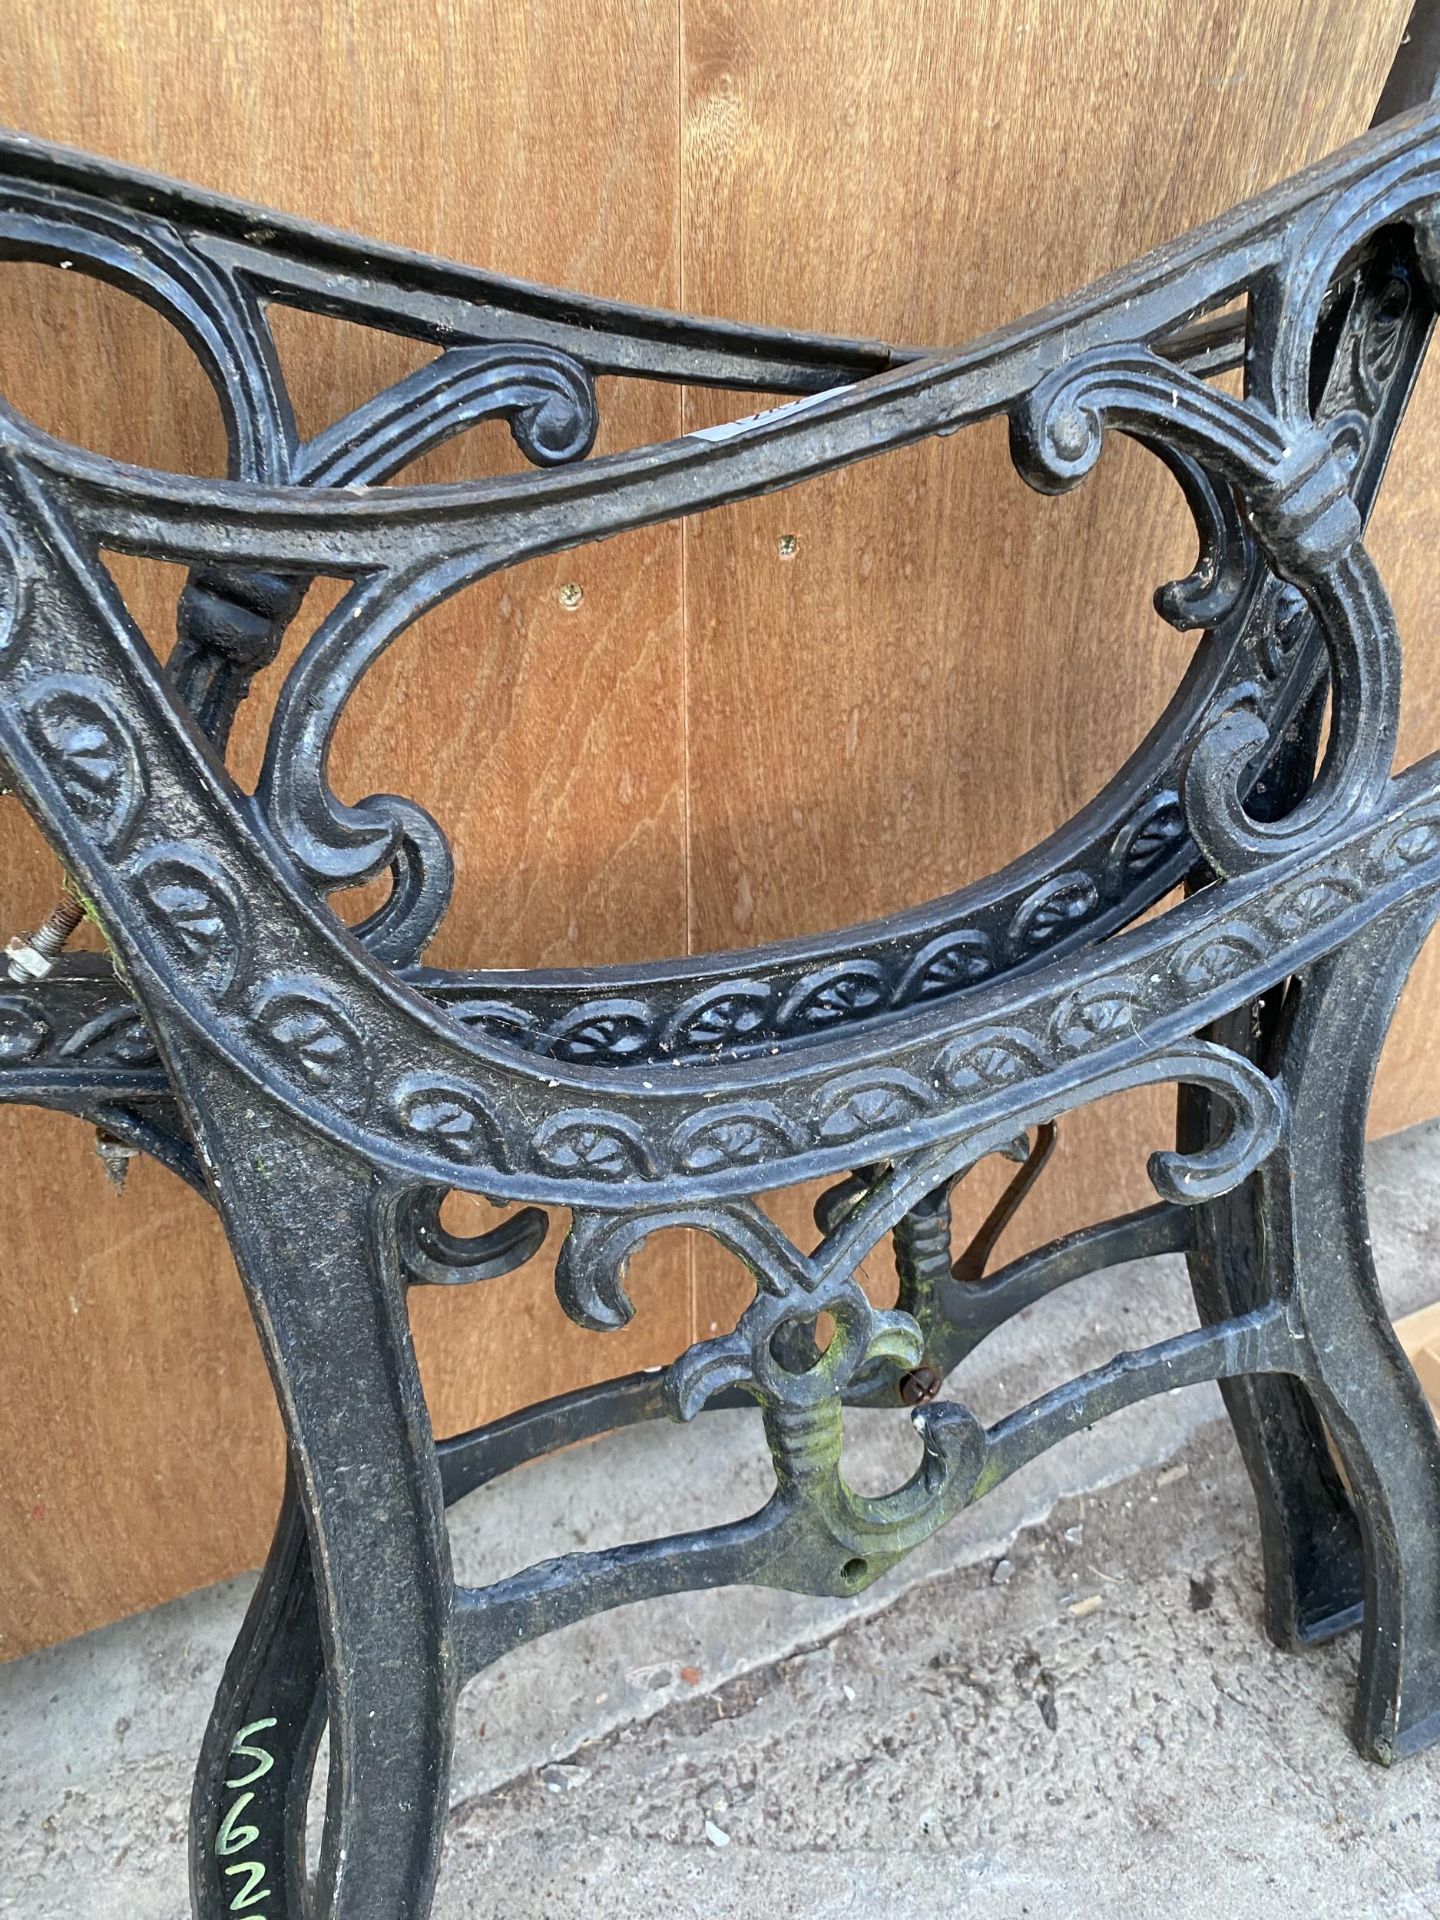 A PAIR OF DECORATIVE CAST IRON BENCH ENDS - Image 2 of 3